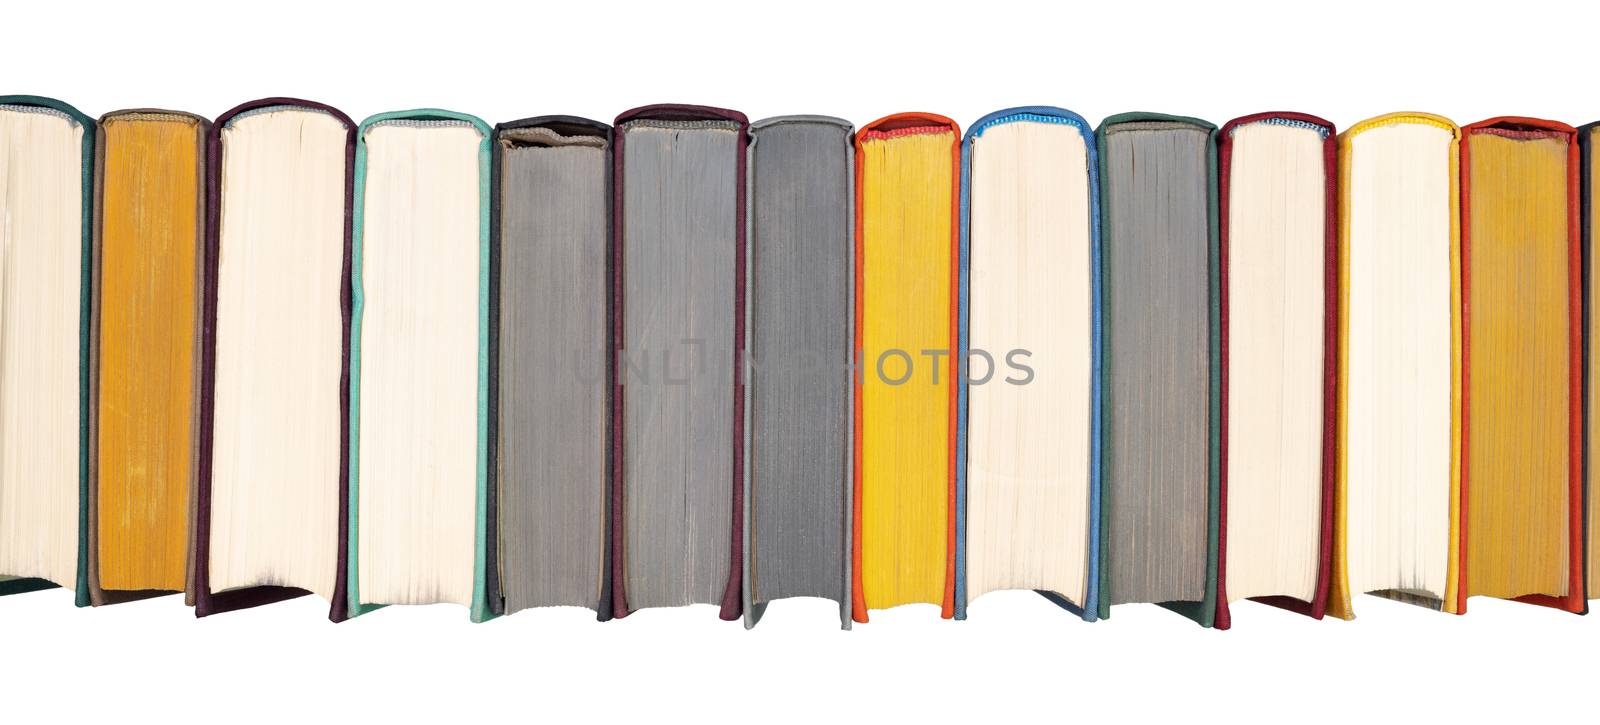 Stack of hardcover books on bookshelf. Close-up view of vintage hardback books isolated on white background. Flat lay headline banner by Alexander-Piragis